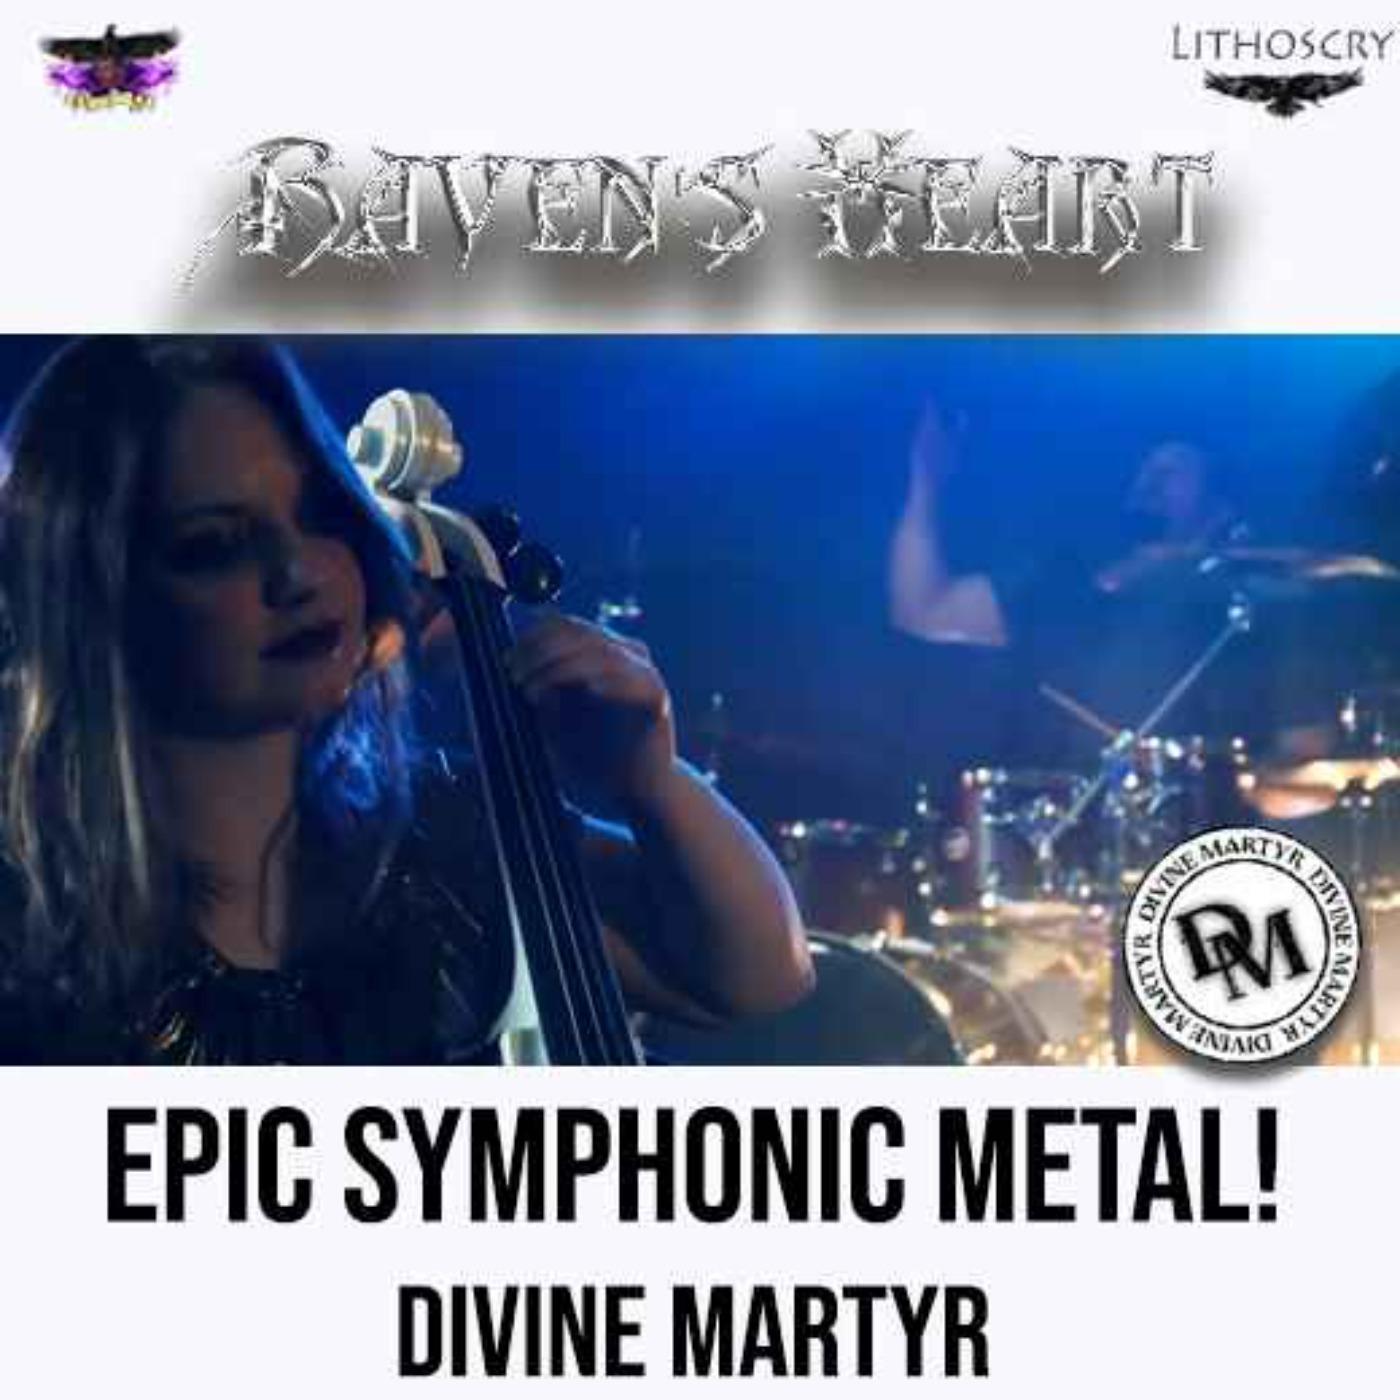 Epic Symphonic Metal From Divine Martyr